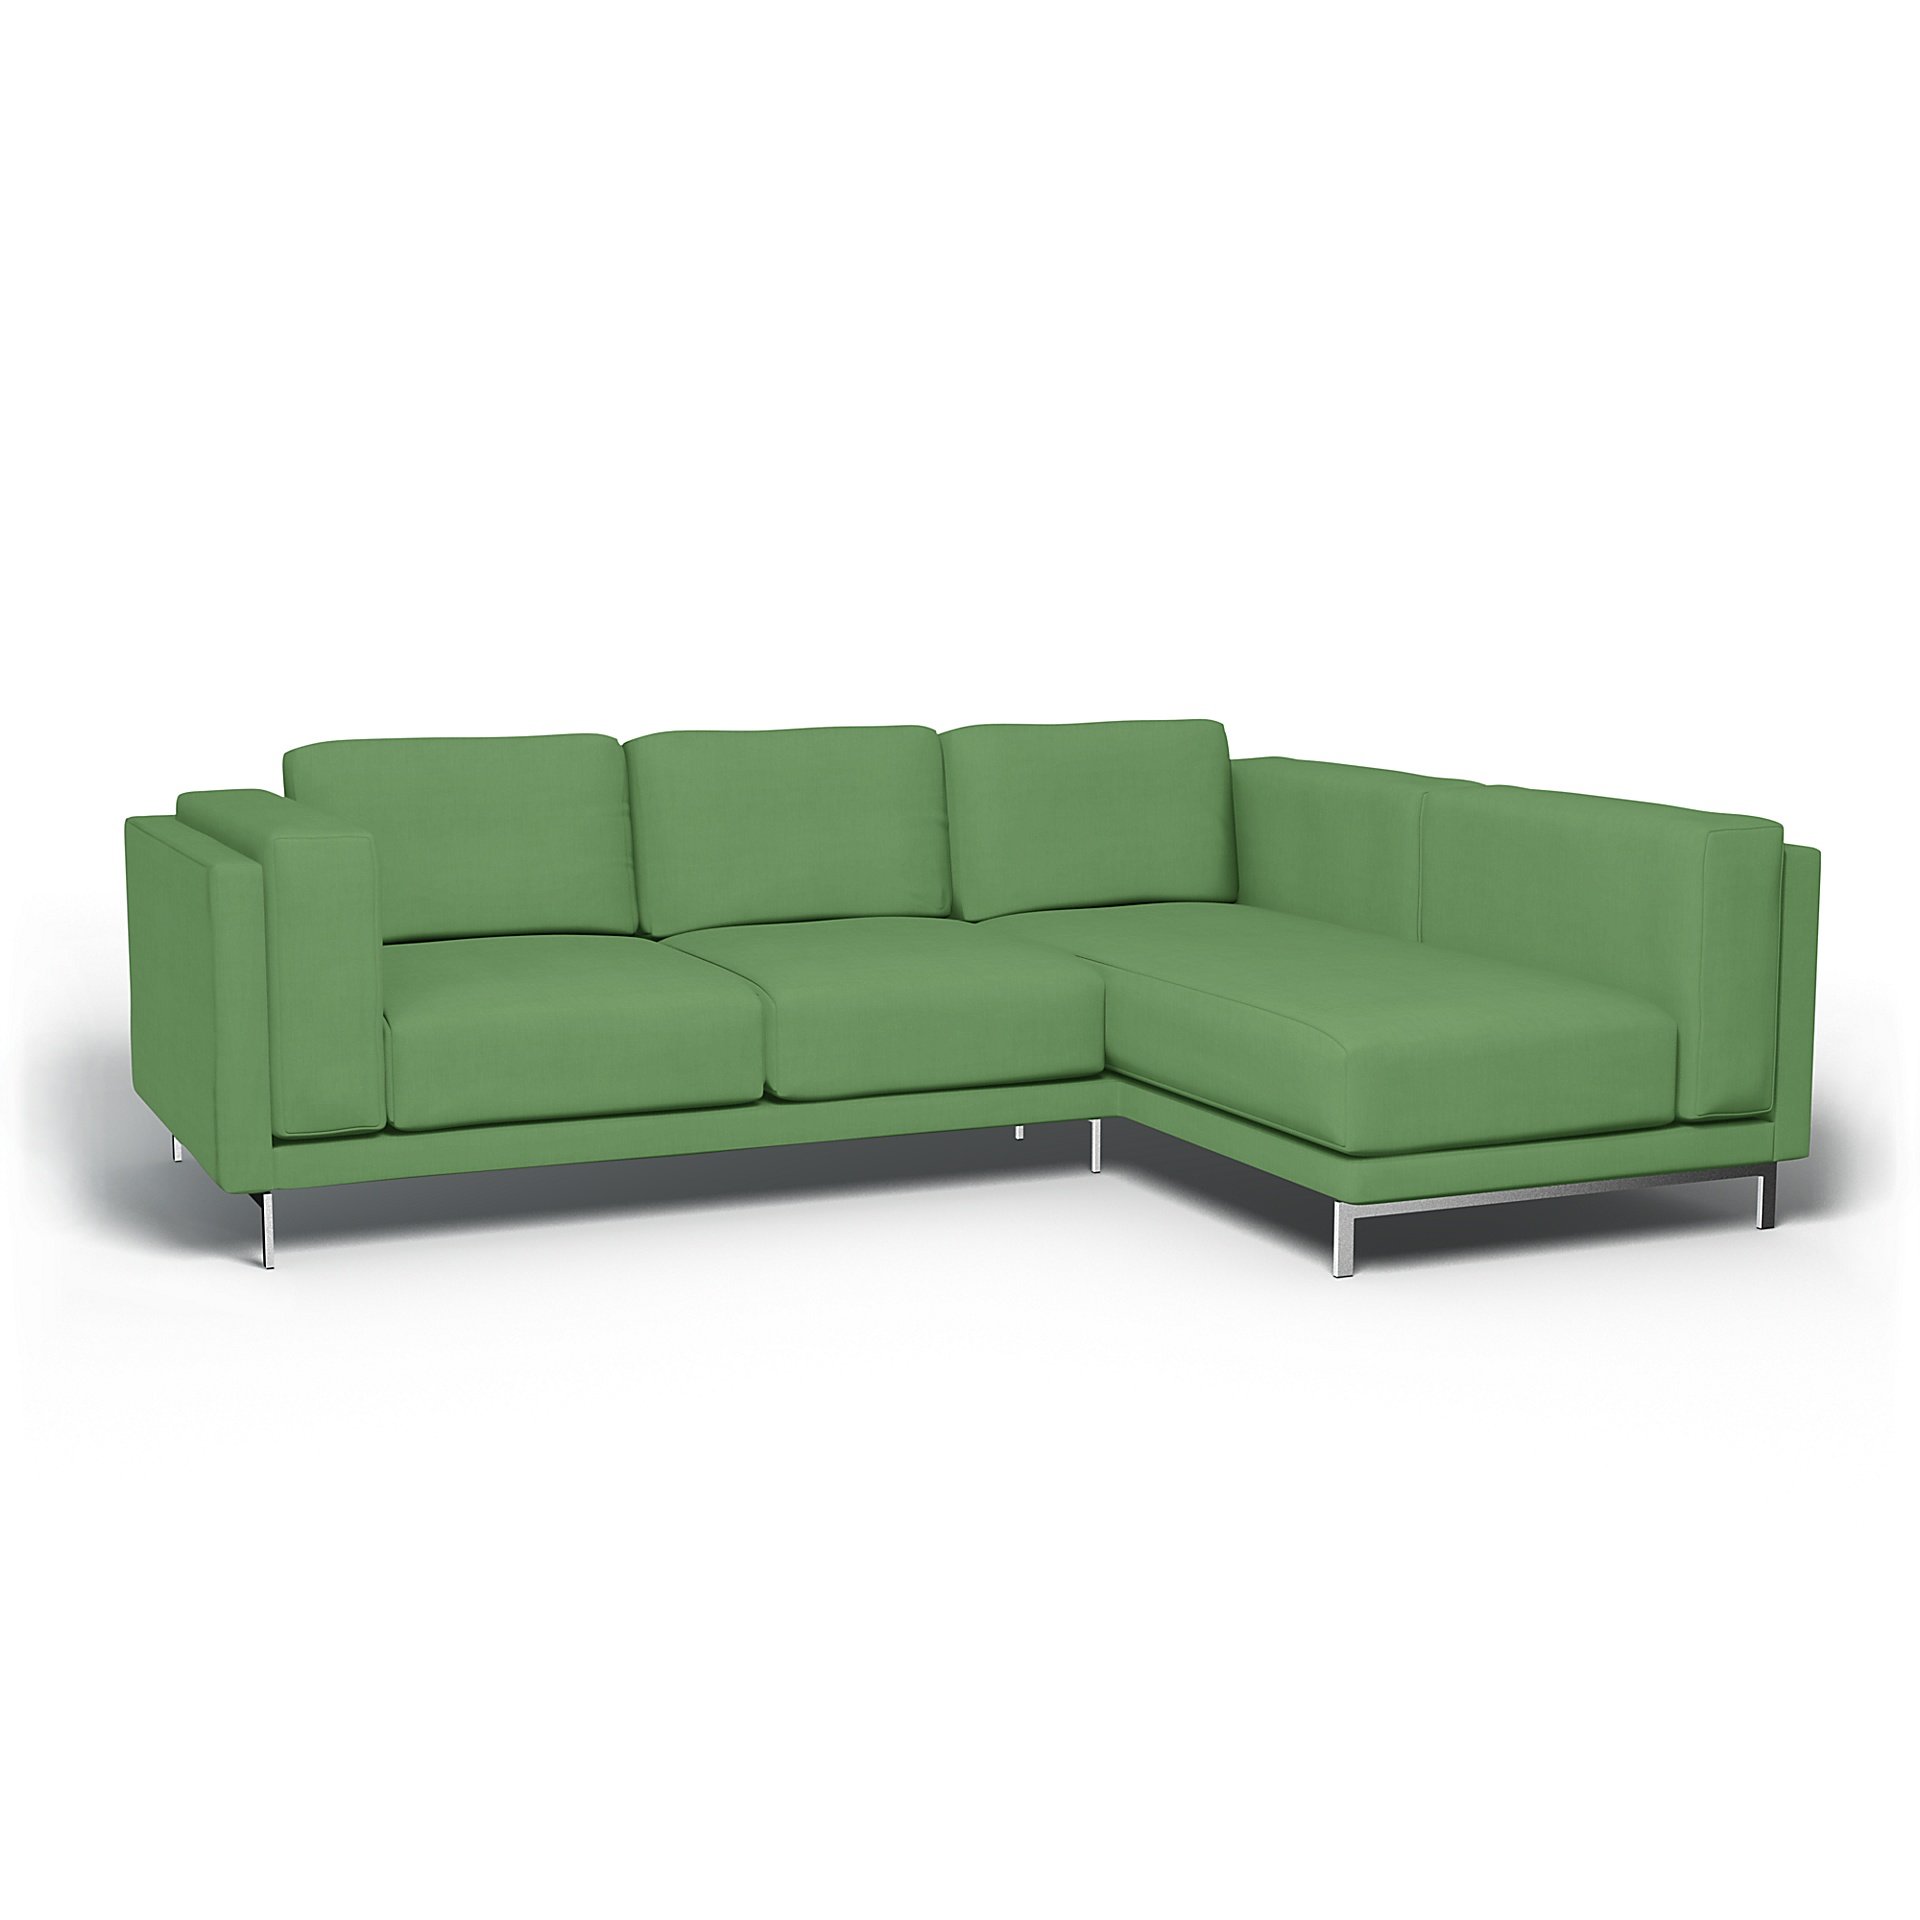 IKEA - Nockeby 3 Seat Sofa with Right Chaise Cover, Apple Green, Linen - Bemz